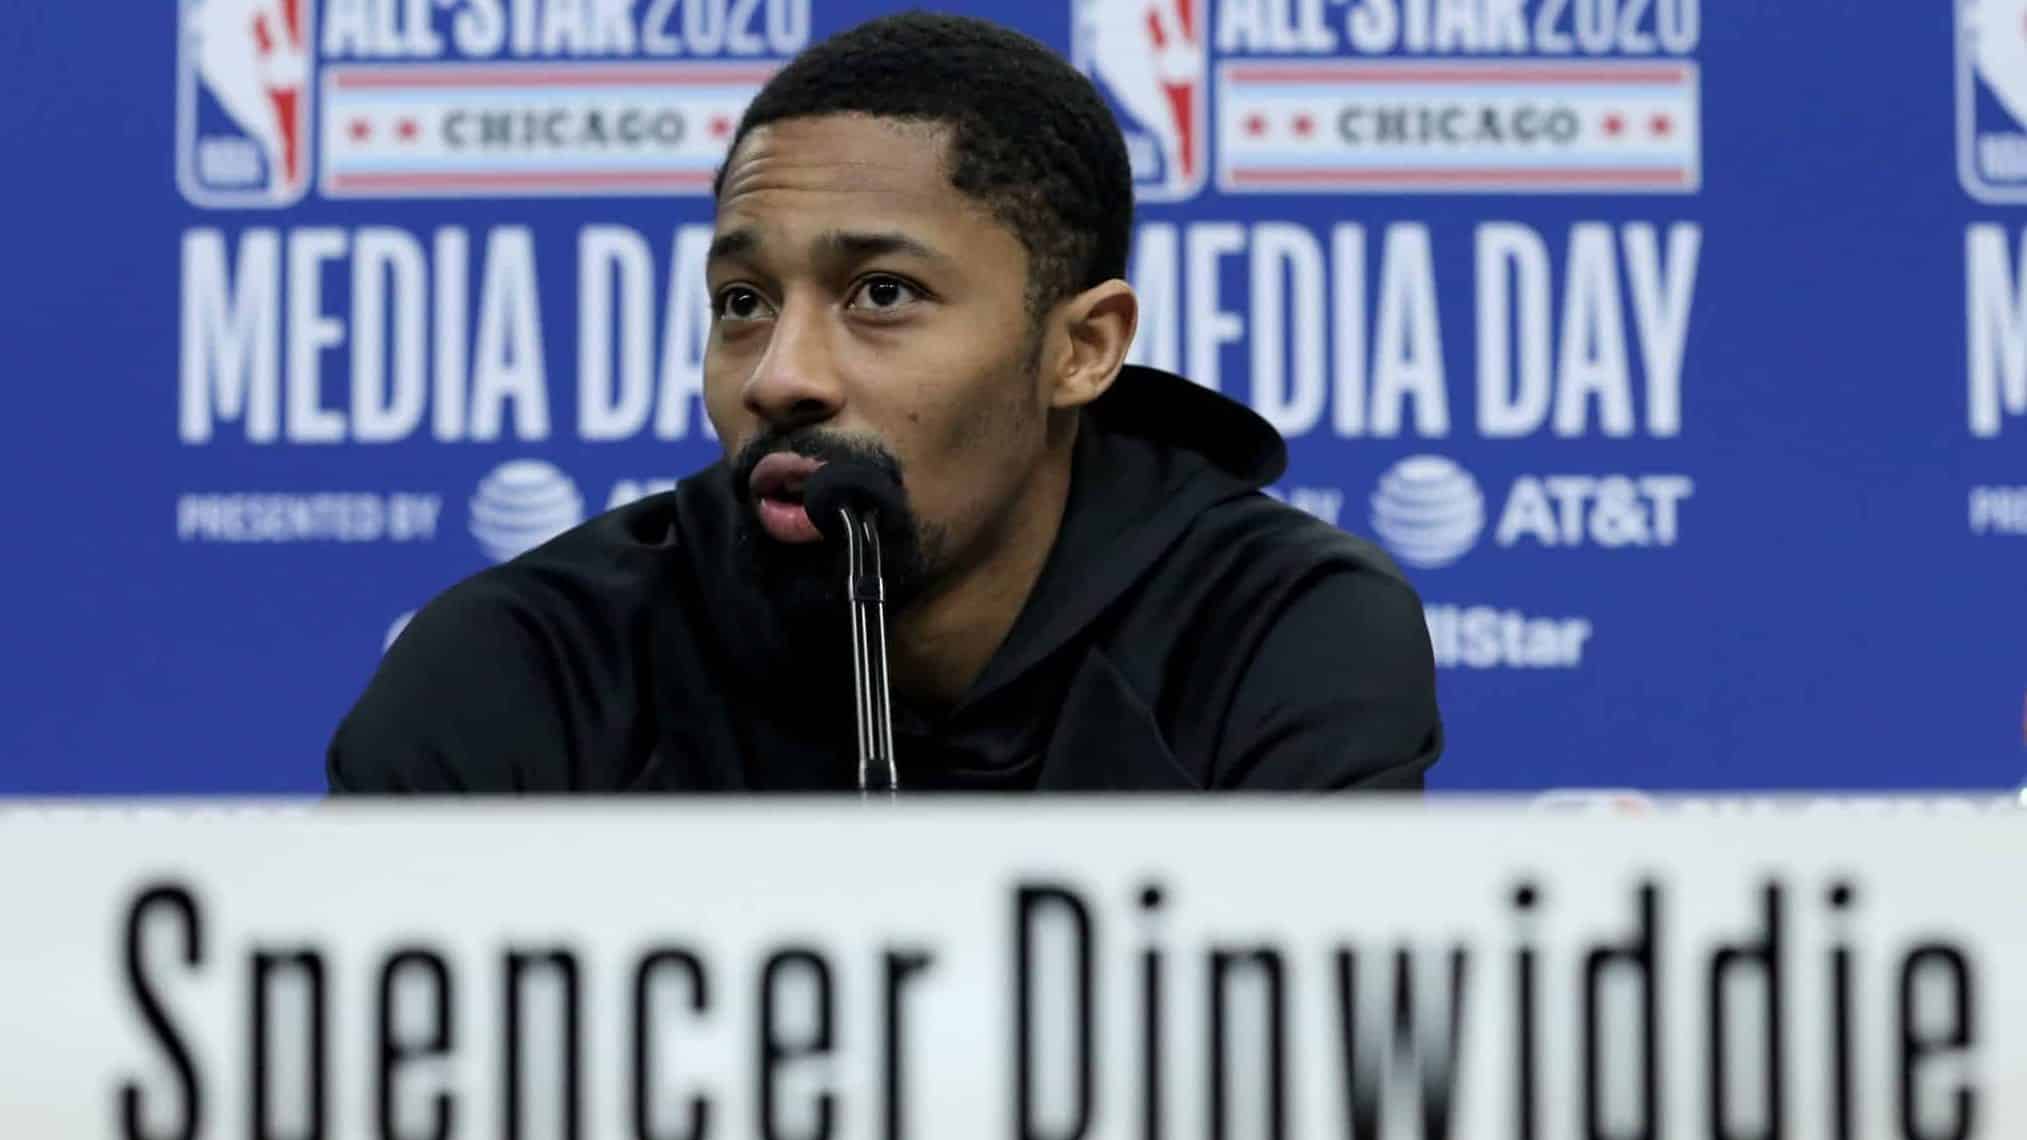 CHICAGO, ILLINOIS - FEBRUARY 15: Spencer Dinwiddie of the Brooklyn Nets speaks to the media during 2020 NBA All-Star - Practice & Media Day at Wintrust Arena on February 15, 2020 in Chicago, Illinois.